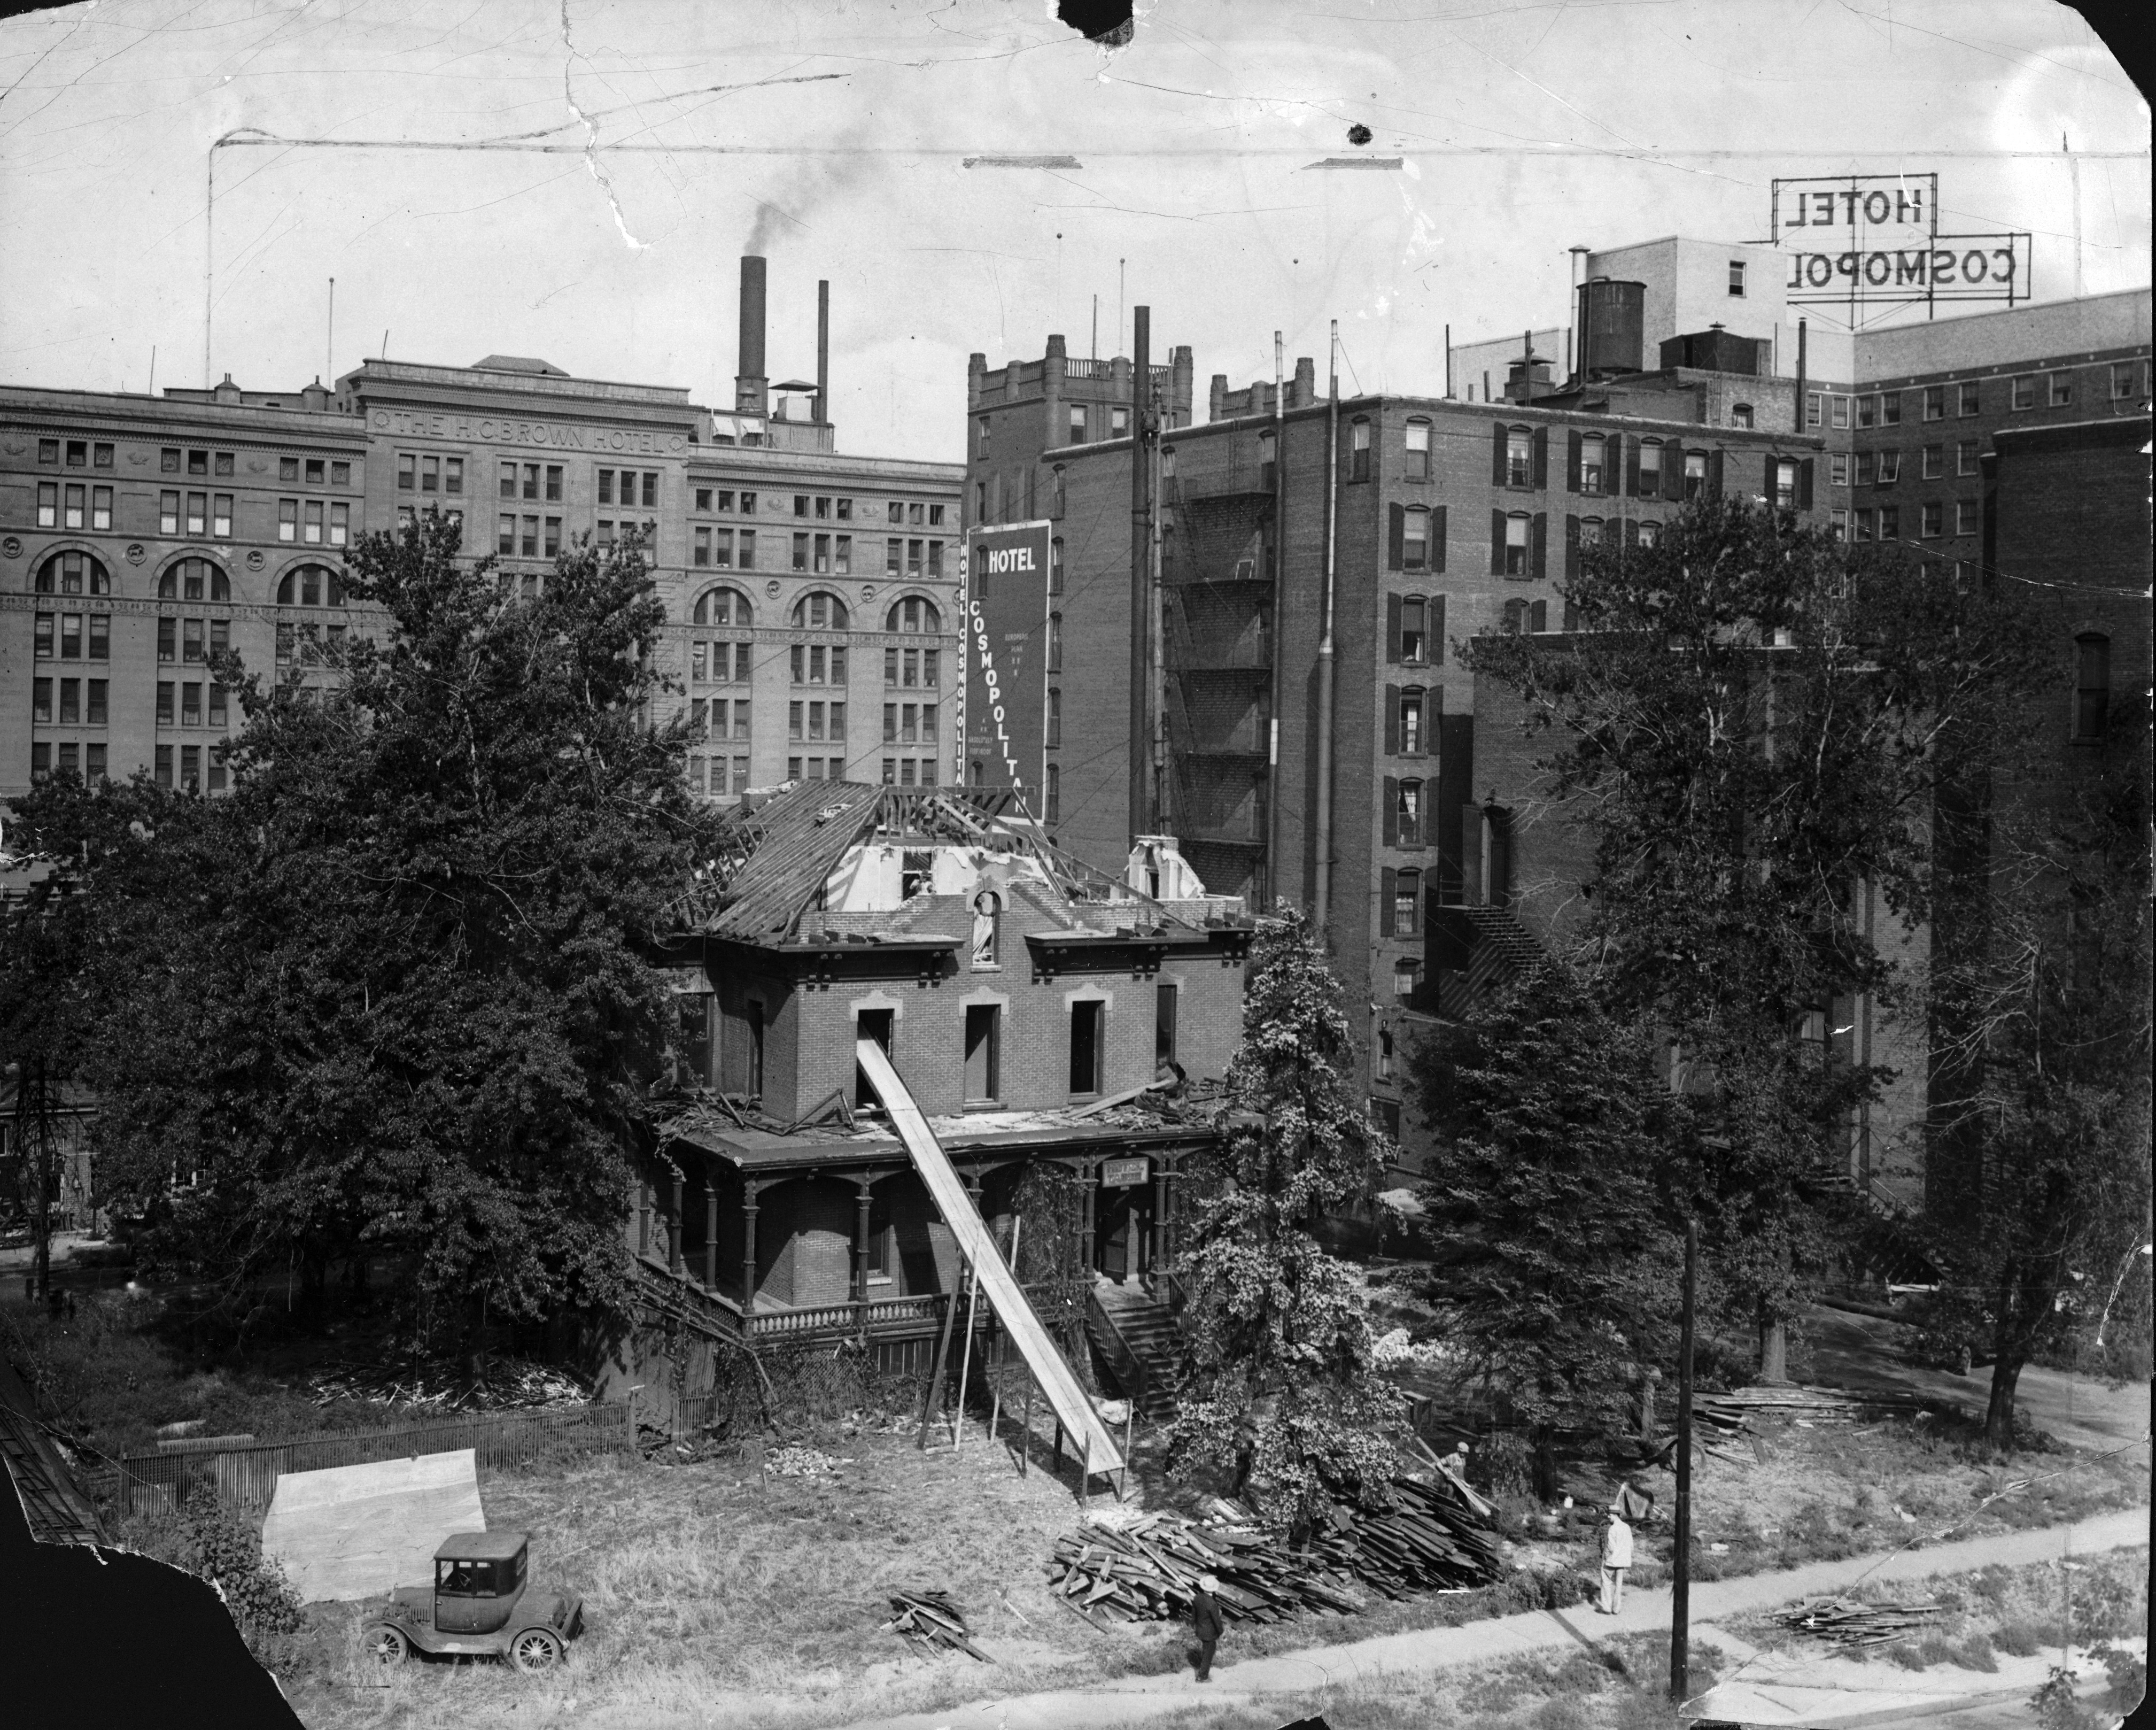 Photo of a Victorian home being demolished, with multi-story buildings towering over it. There is a chute coming from the front upstairs window of the house, down to the front lawn. The roof is being torn down and large parts of it are missing, exposing wooden beams. All of the windows are gone. Tall trees stand near the house, and an vintage car is in the corner of the front yard. Atop a tall building in the distance are tall letters that say "Hotel Cosmopolitan."